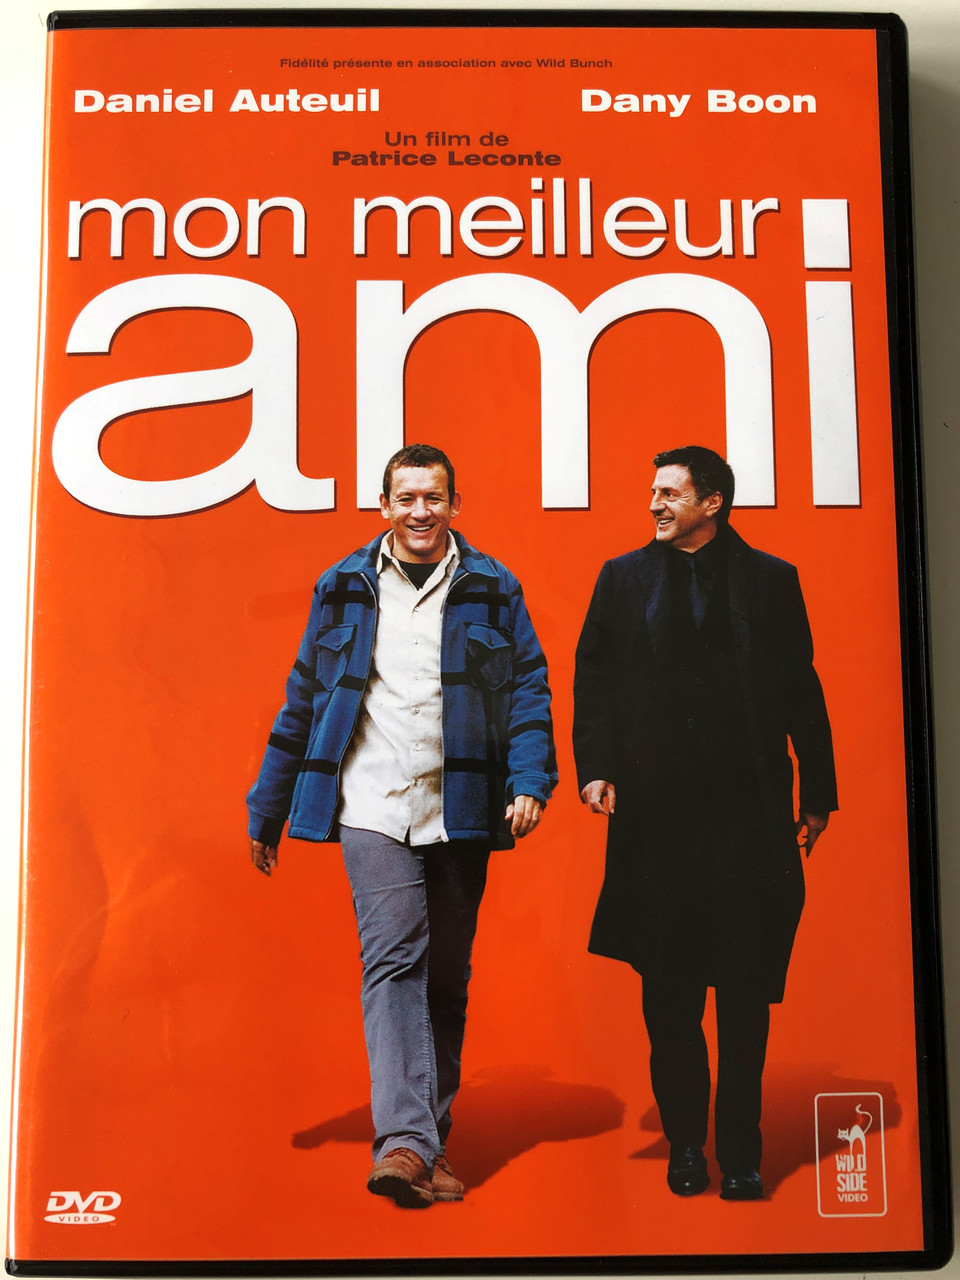 Mon meilleur ami 2 DVD 2015 My best friend / Directed by Patrice Leconte /  Starring: Daniel Auteuil, Dany Boon - bibleinmylanguage